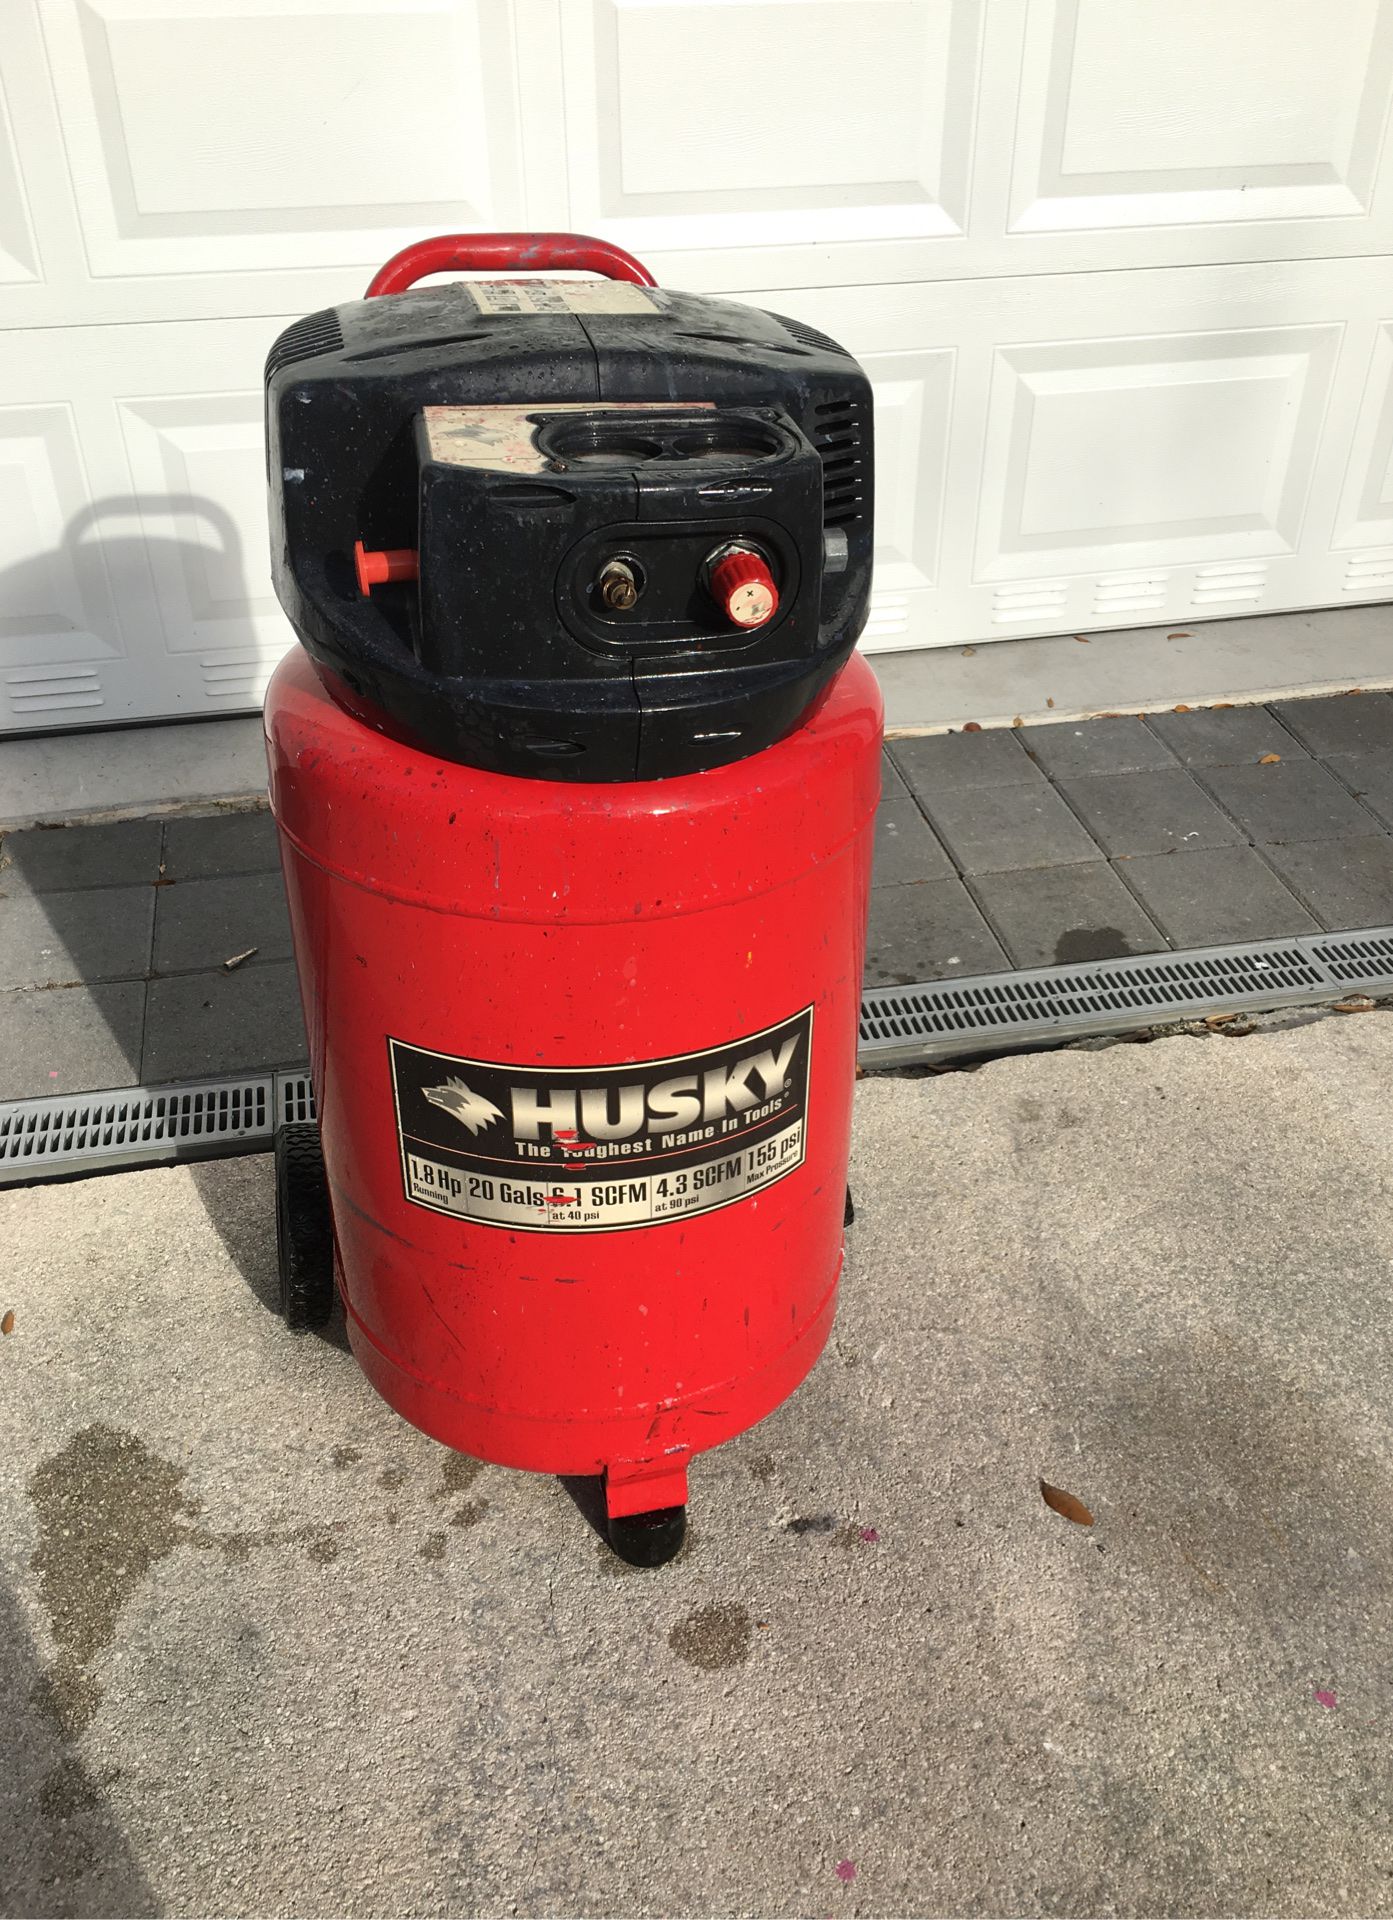 Husky 1.8 hp 20 gallon 155 psi air compressor. Huskies really built a name for themselves now